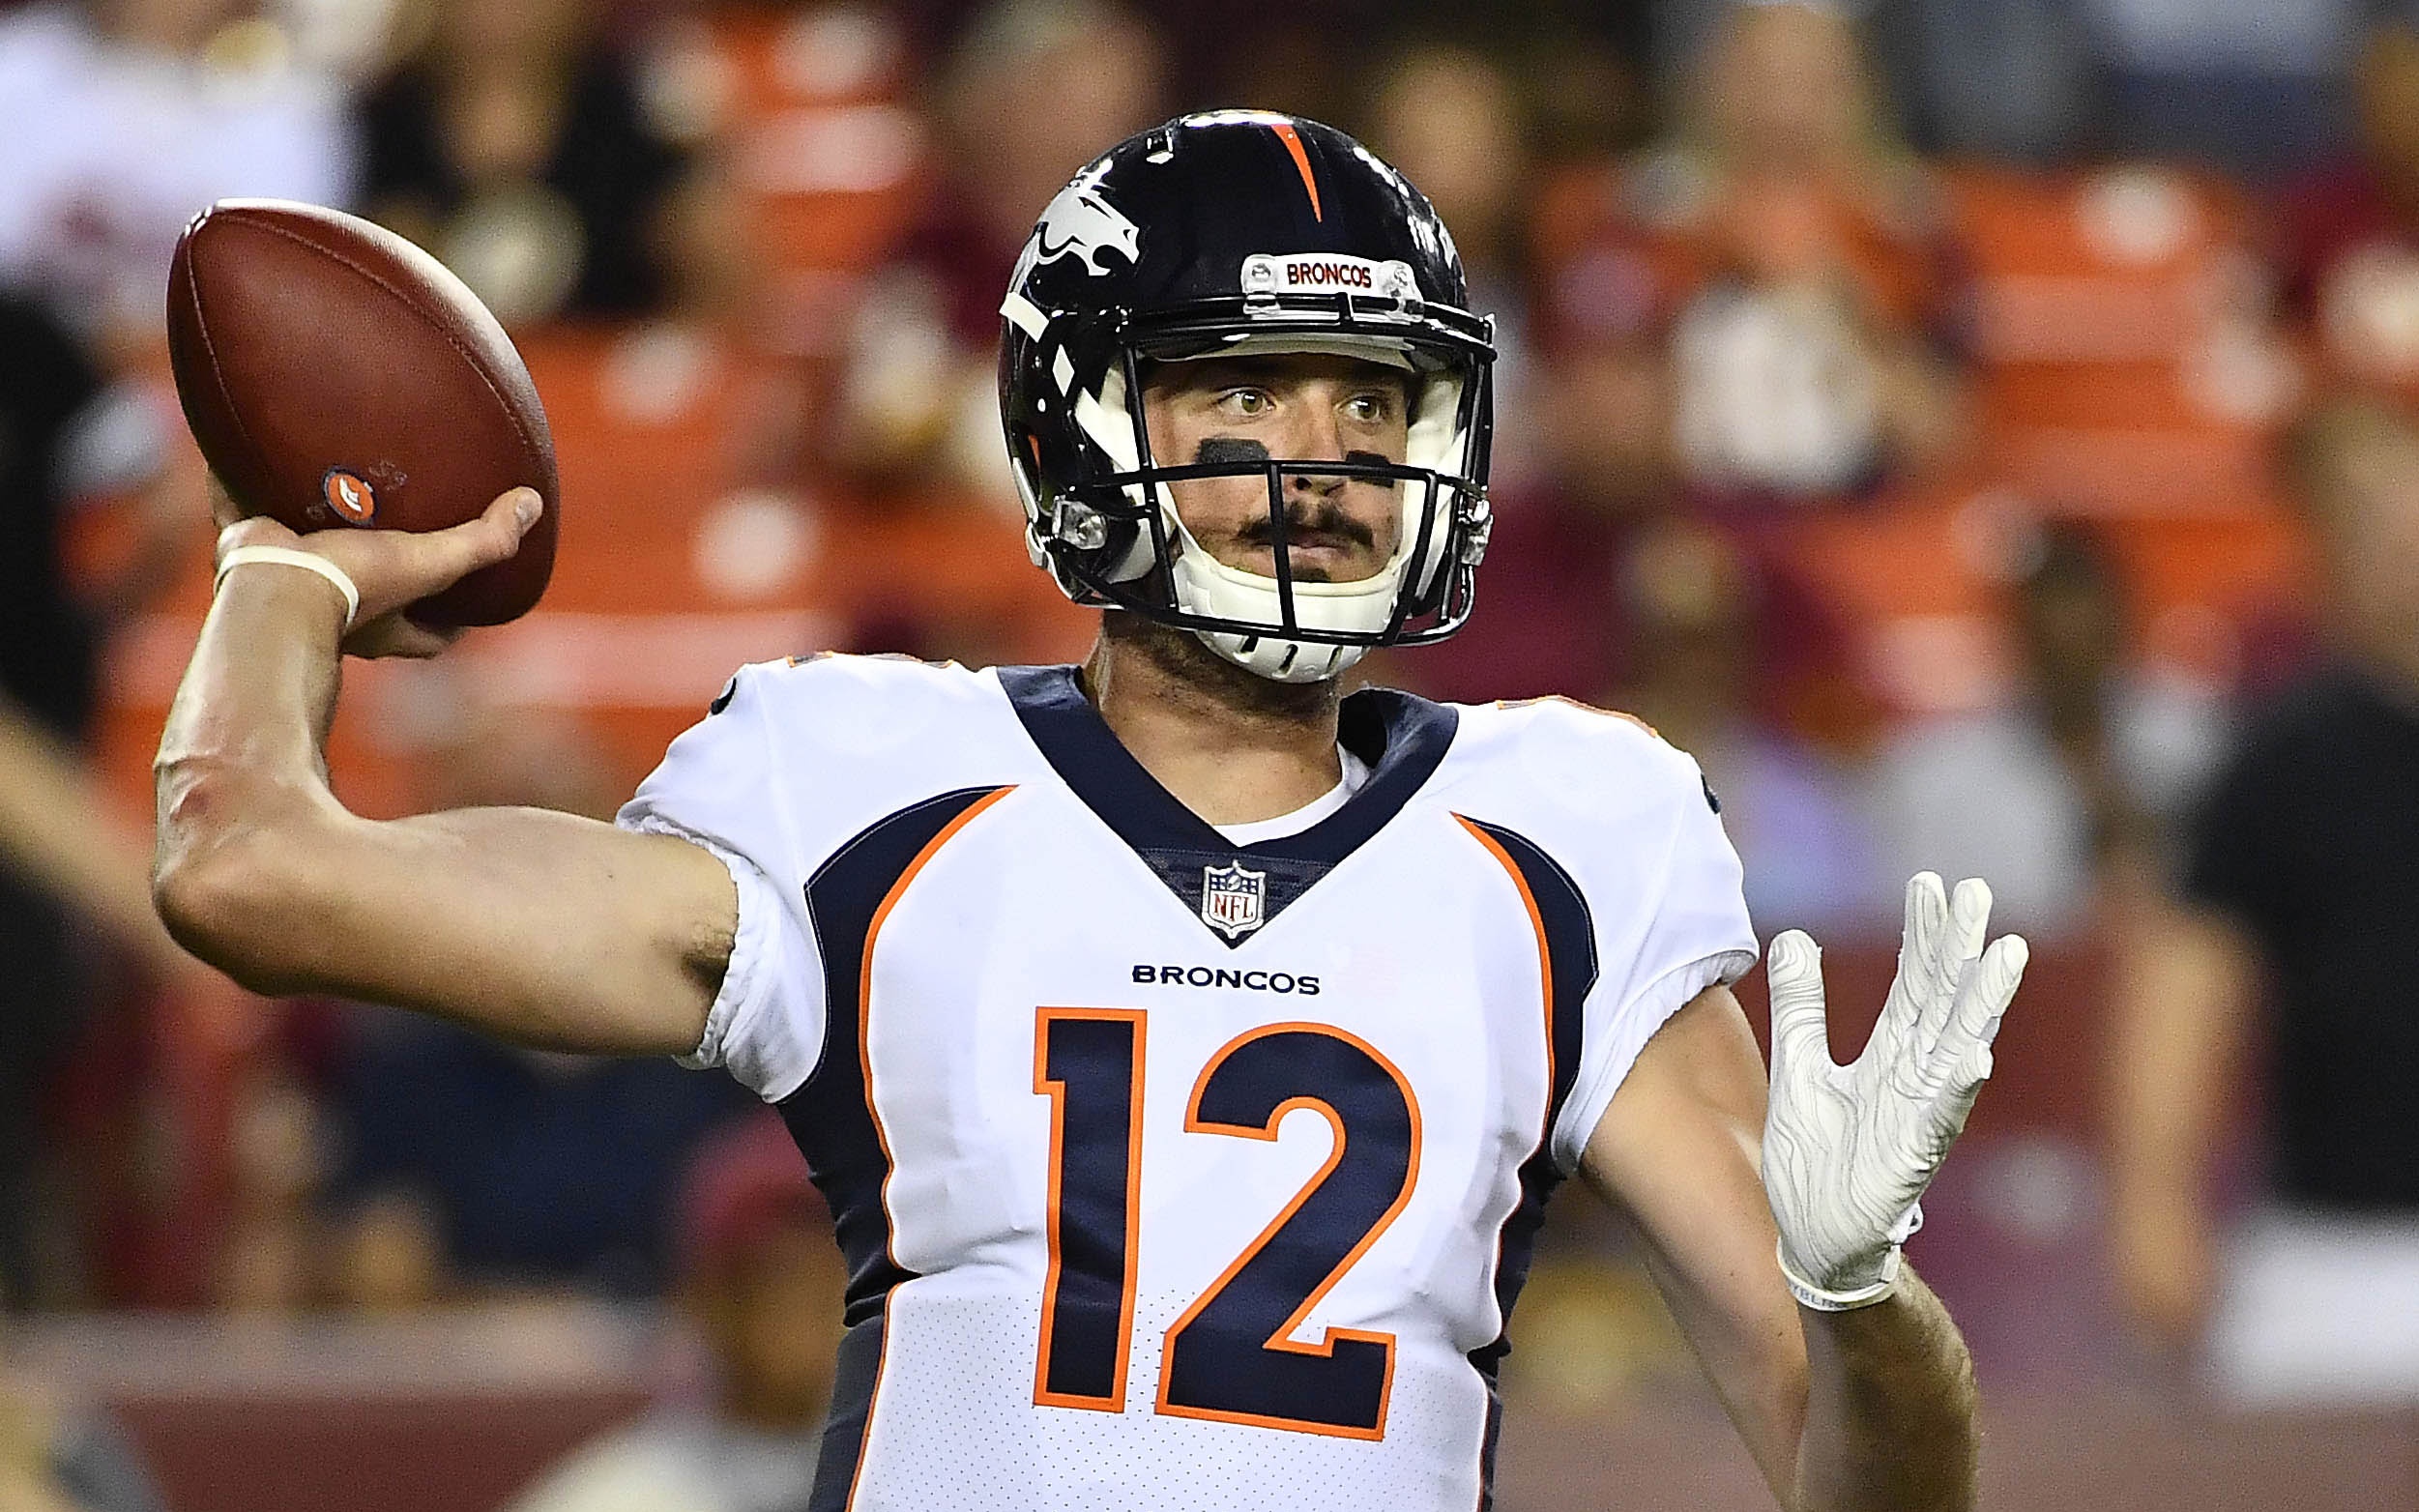 Paxton Lynch against the Redskins, Friday. Credit: Brad Mills, USA TODAY Sports.